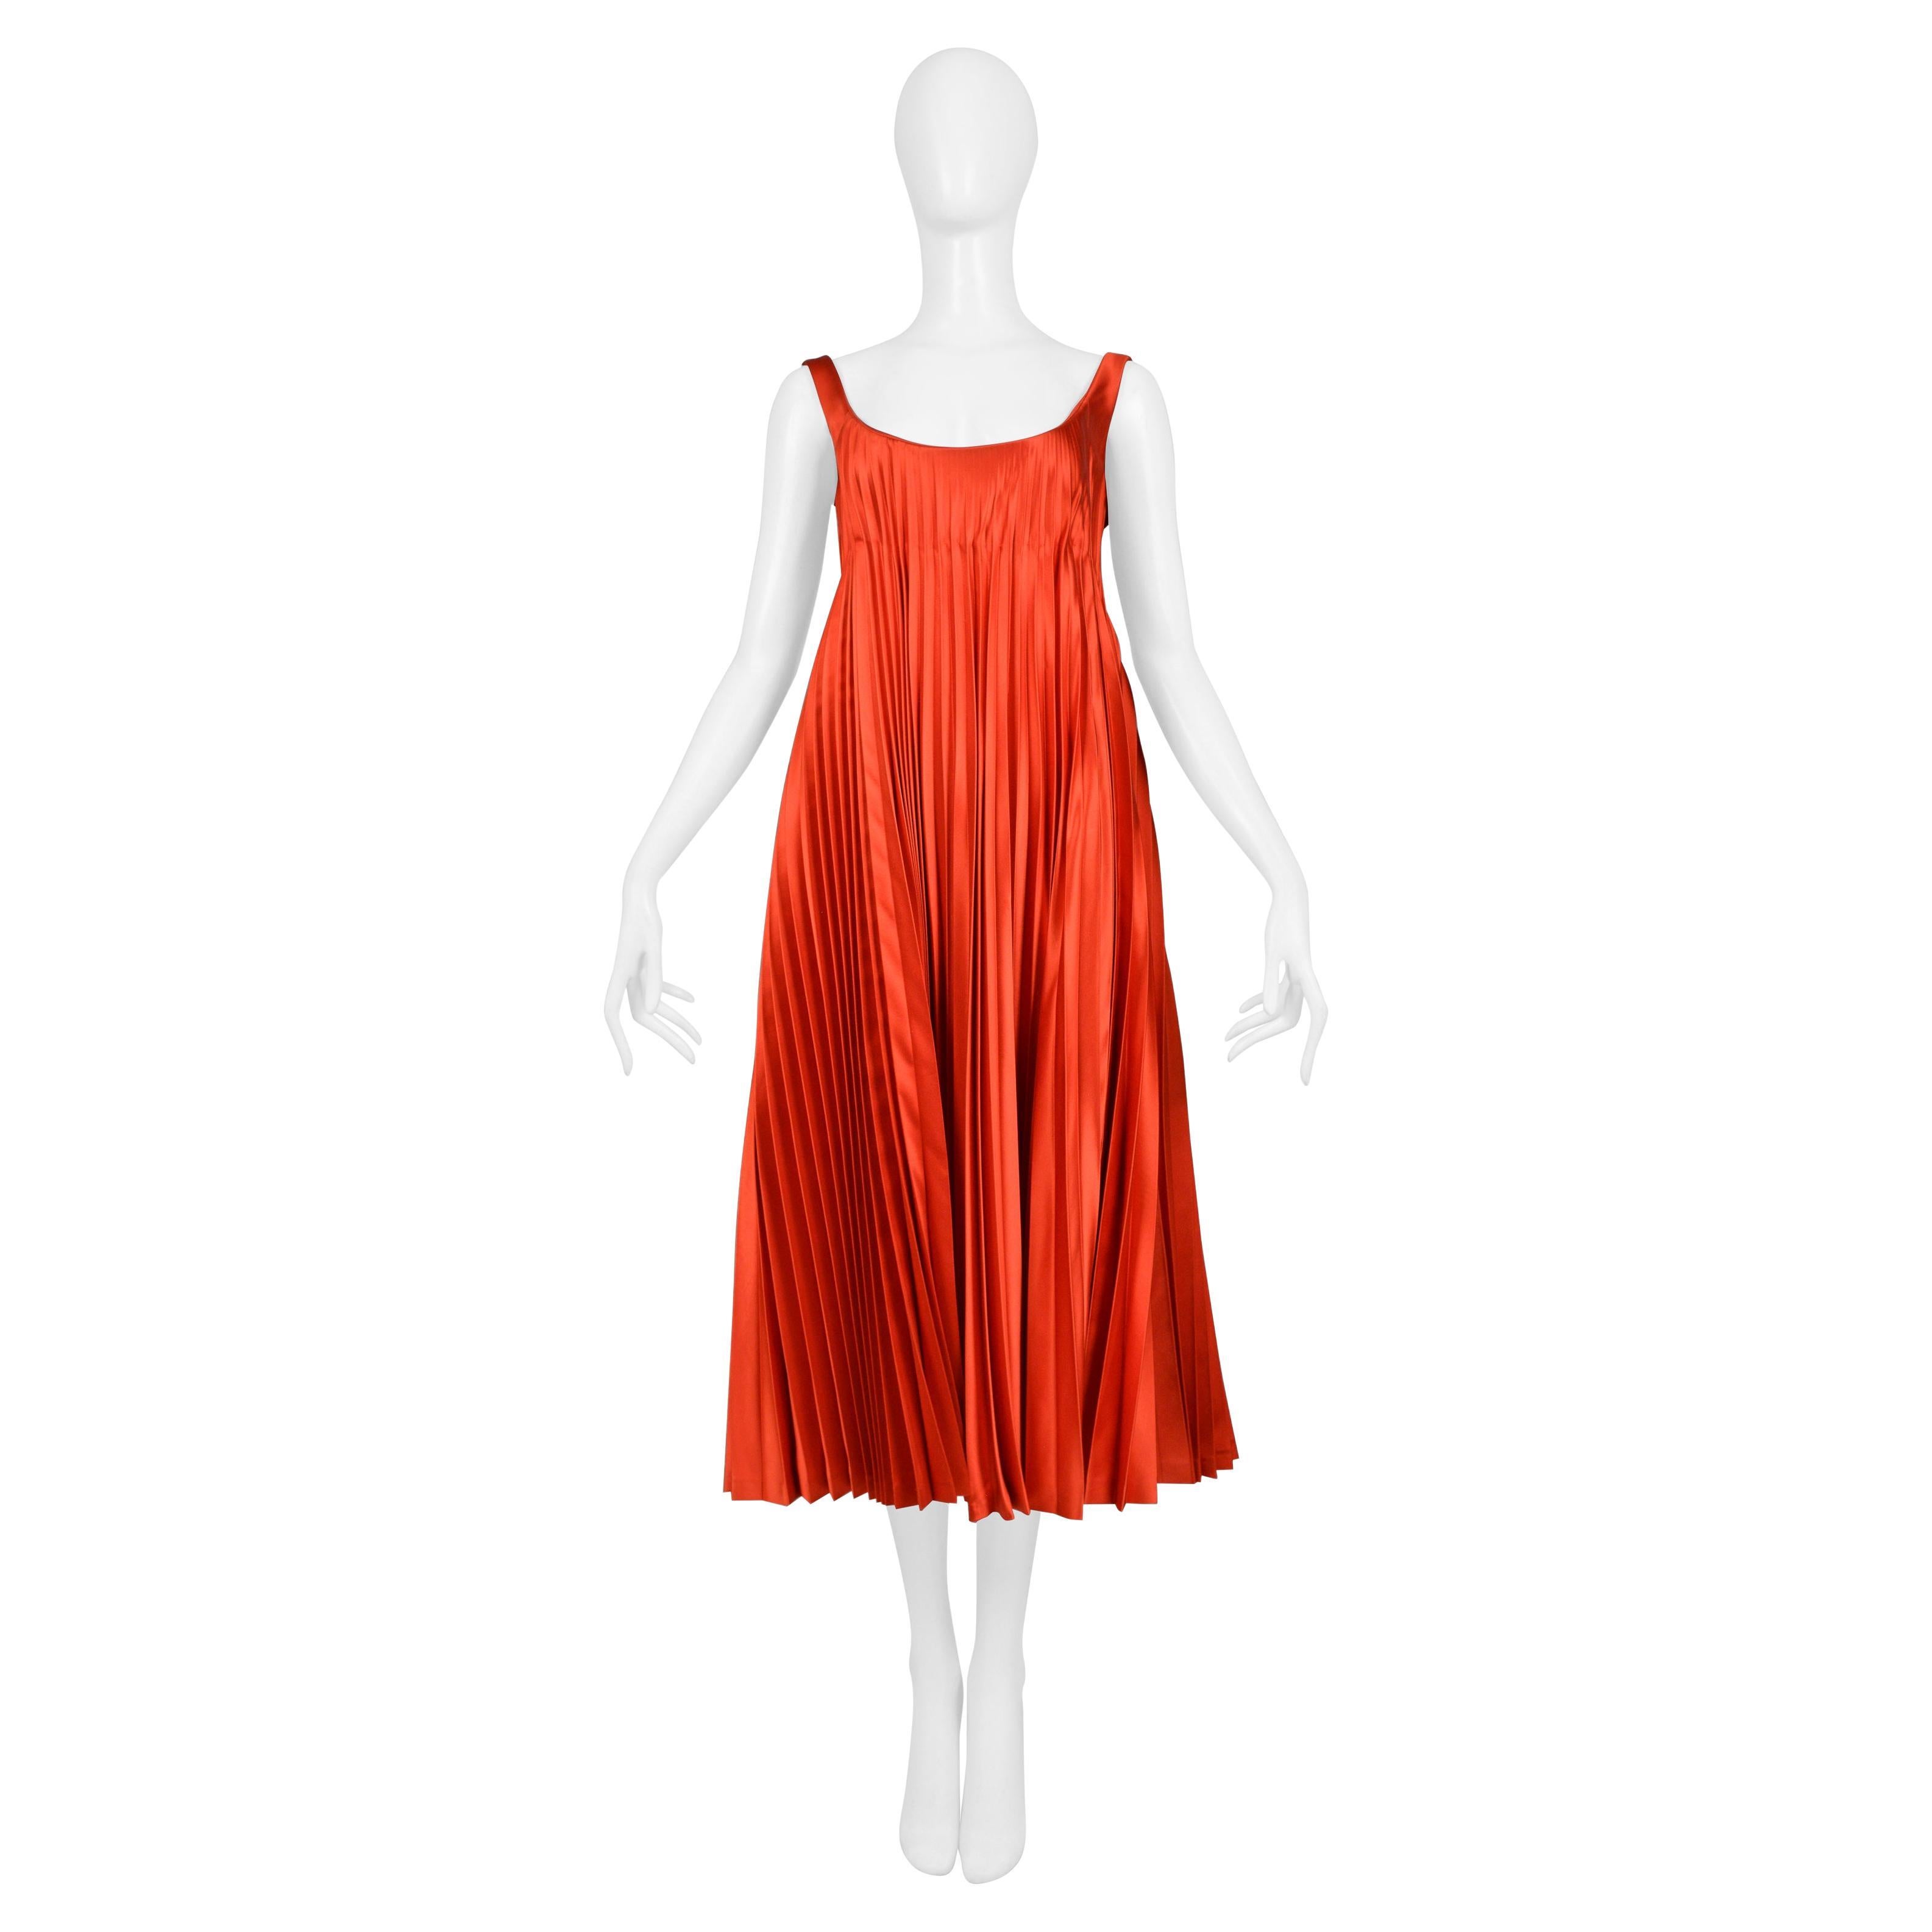 Alexander McQueen Red Satin Pleated Cocktail Dress 2003 For Sale